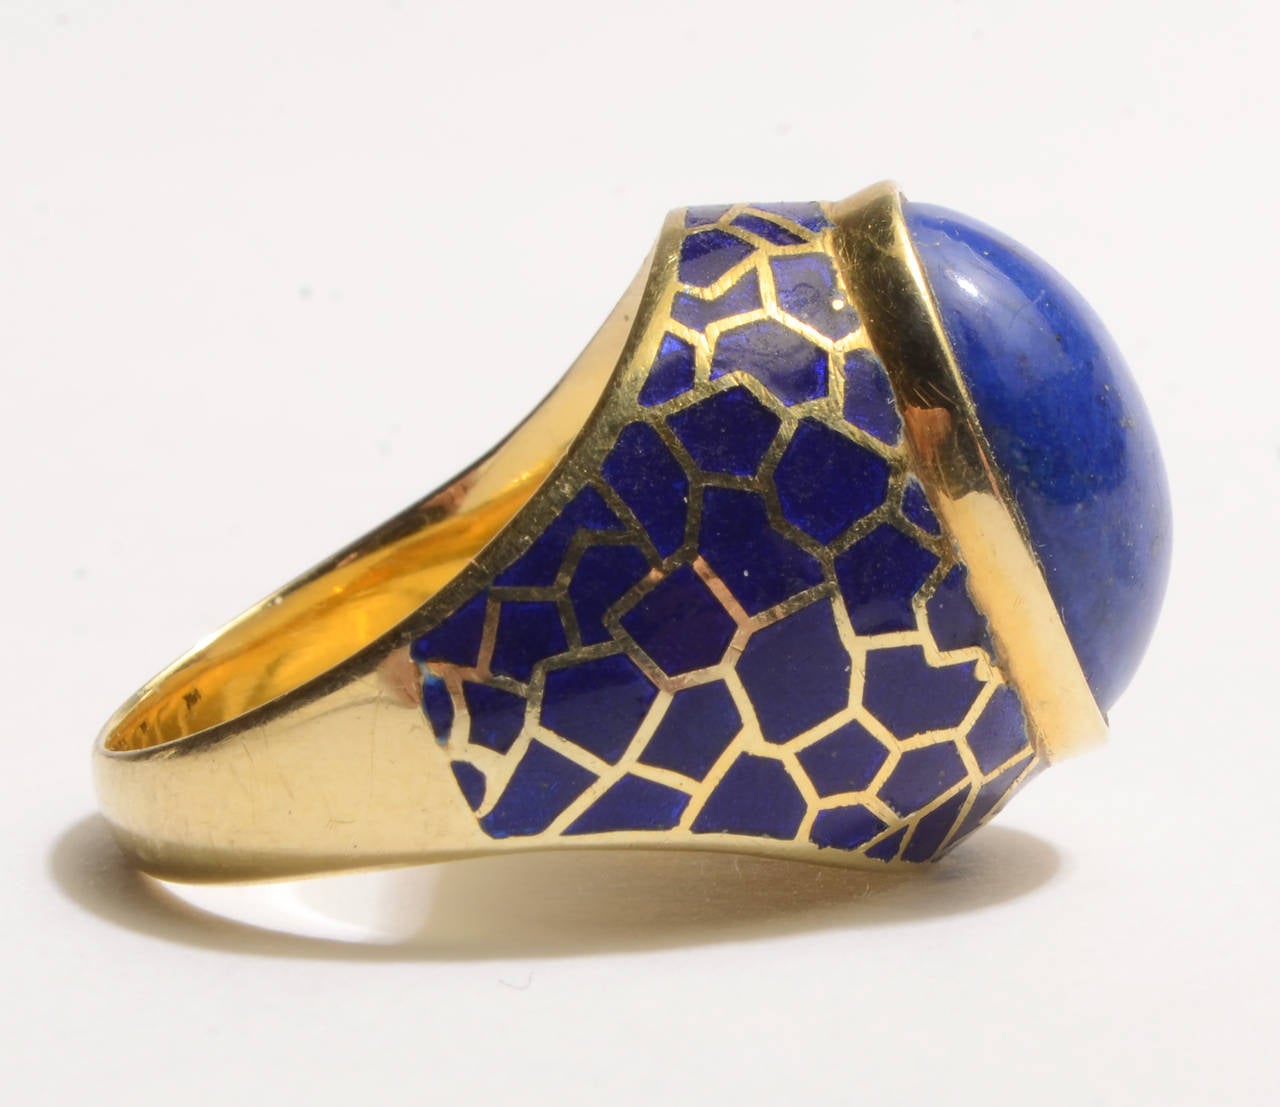 A central oval lapis lazuli is surrounded by an irregular enamel work design in this 18 karat gold ring.

It is size 6 1/2 but can easily be sized up or down.
Can be worn equally well by a man or woman.